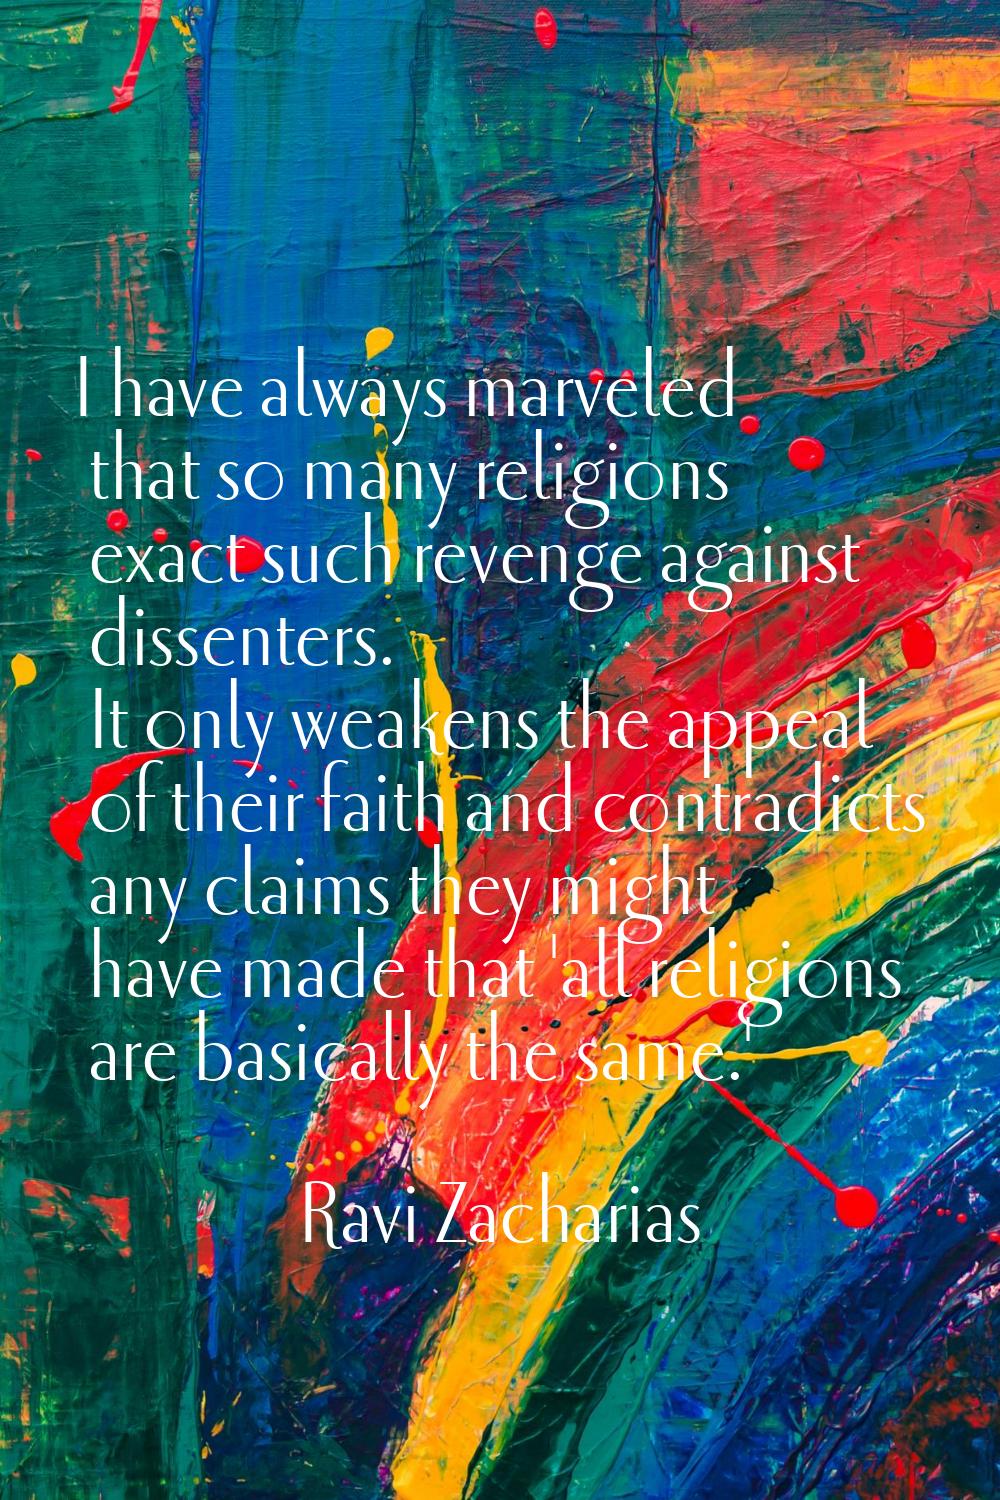 I have always marveled that so many religions exact such revenge against dissenters. It only weaken